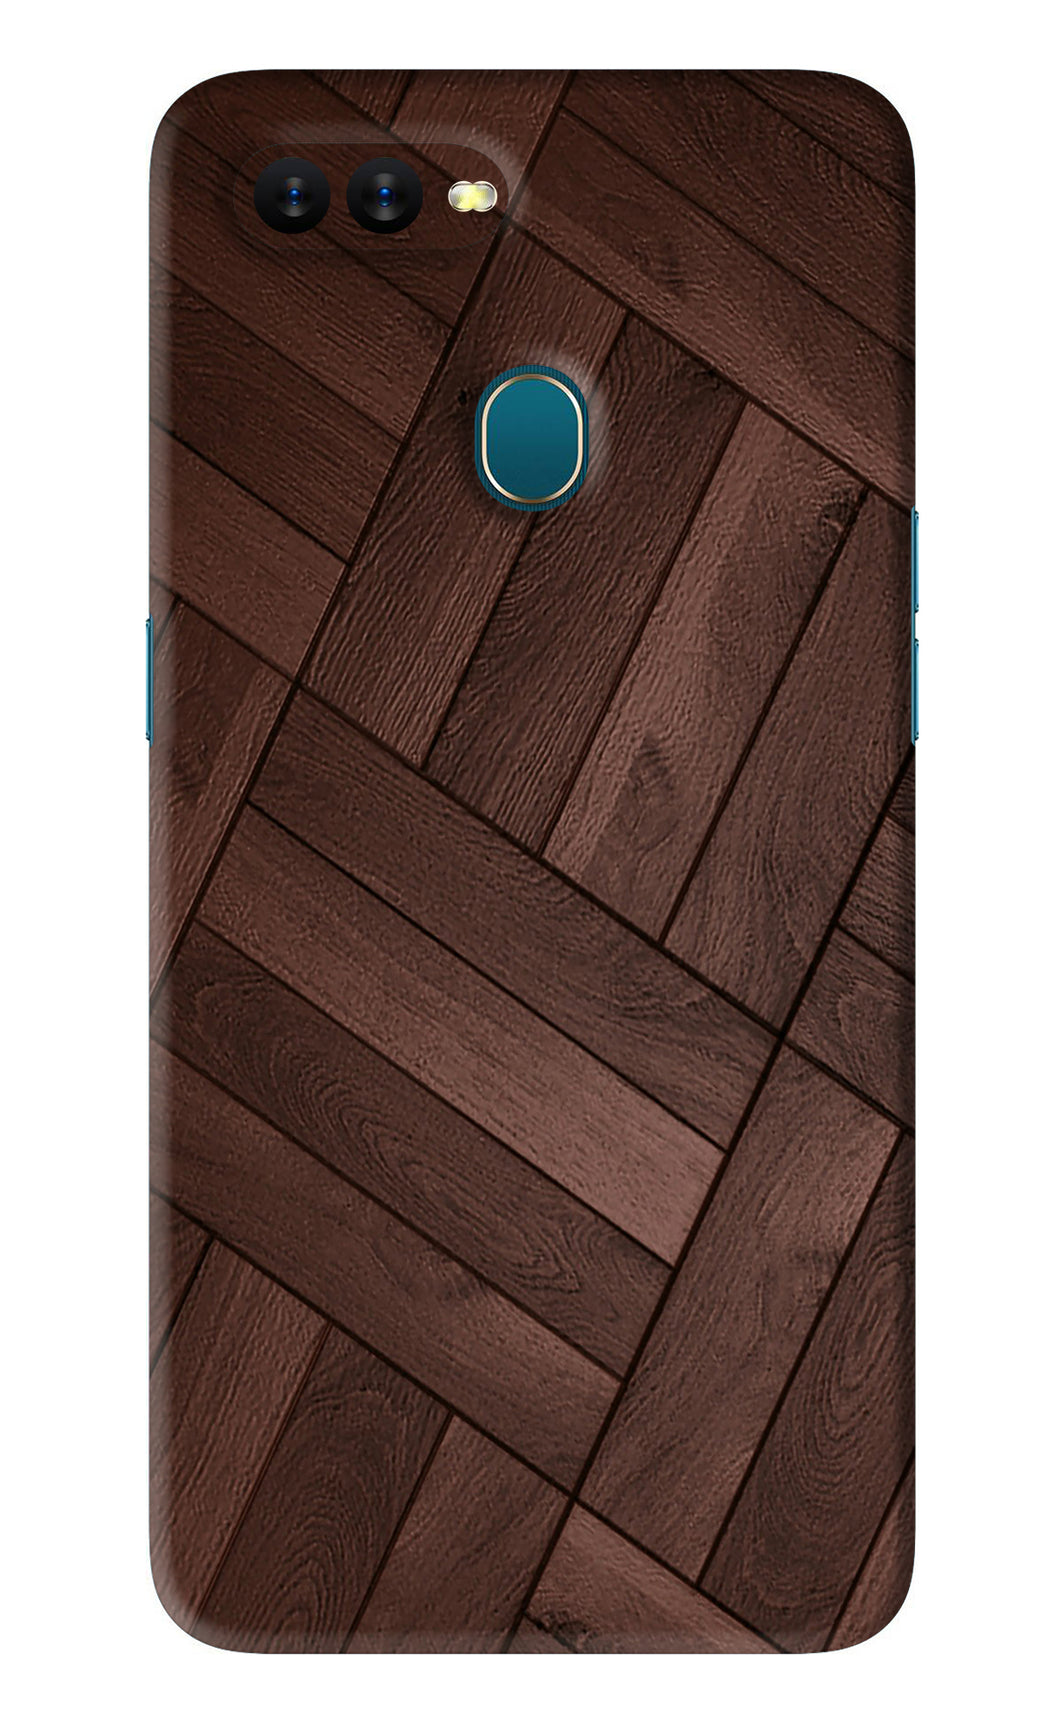 Wooden Texture Design Oppo A5S Back Skin Wrap